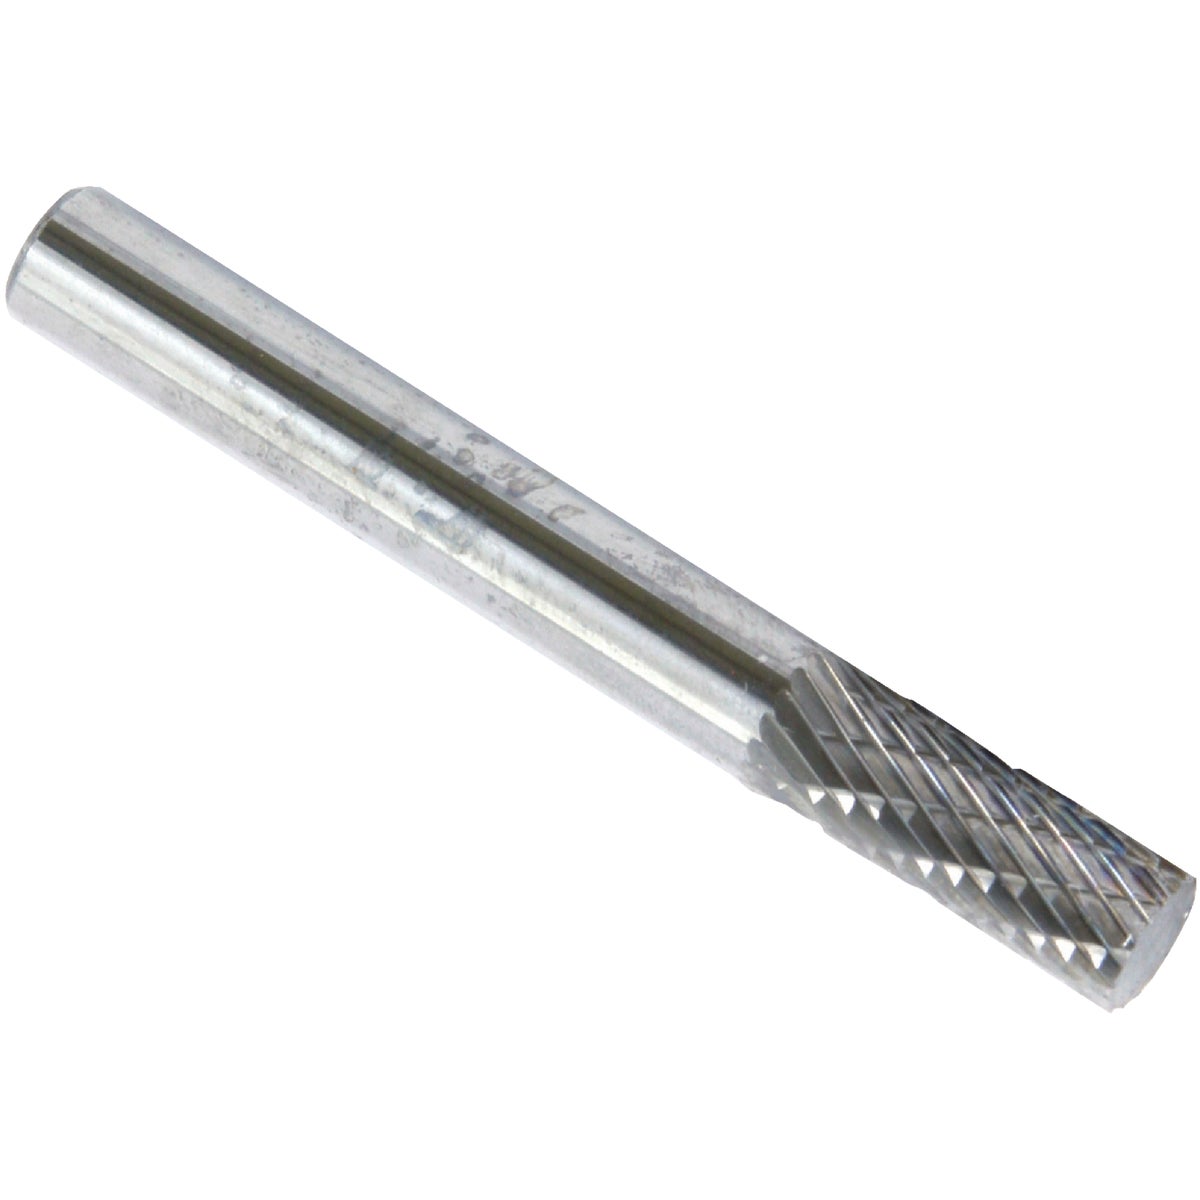 Item 300737, Shank mounted tungsten carbide burrs are double cut for fine work.